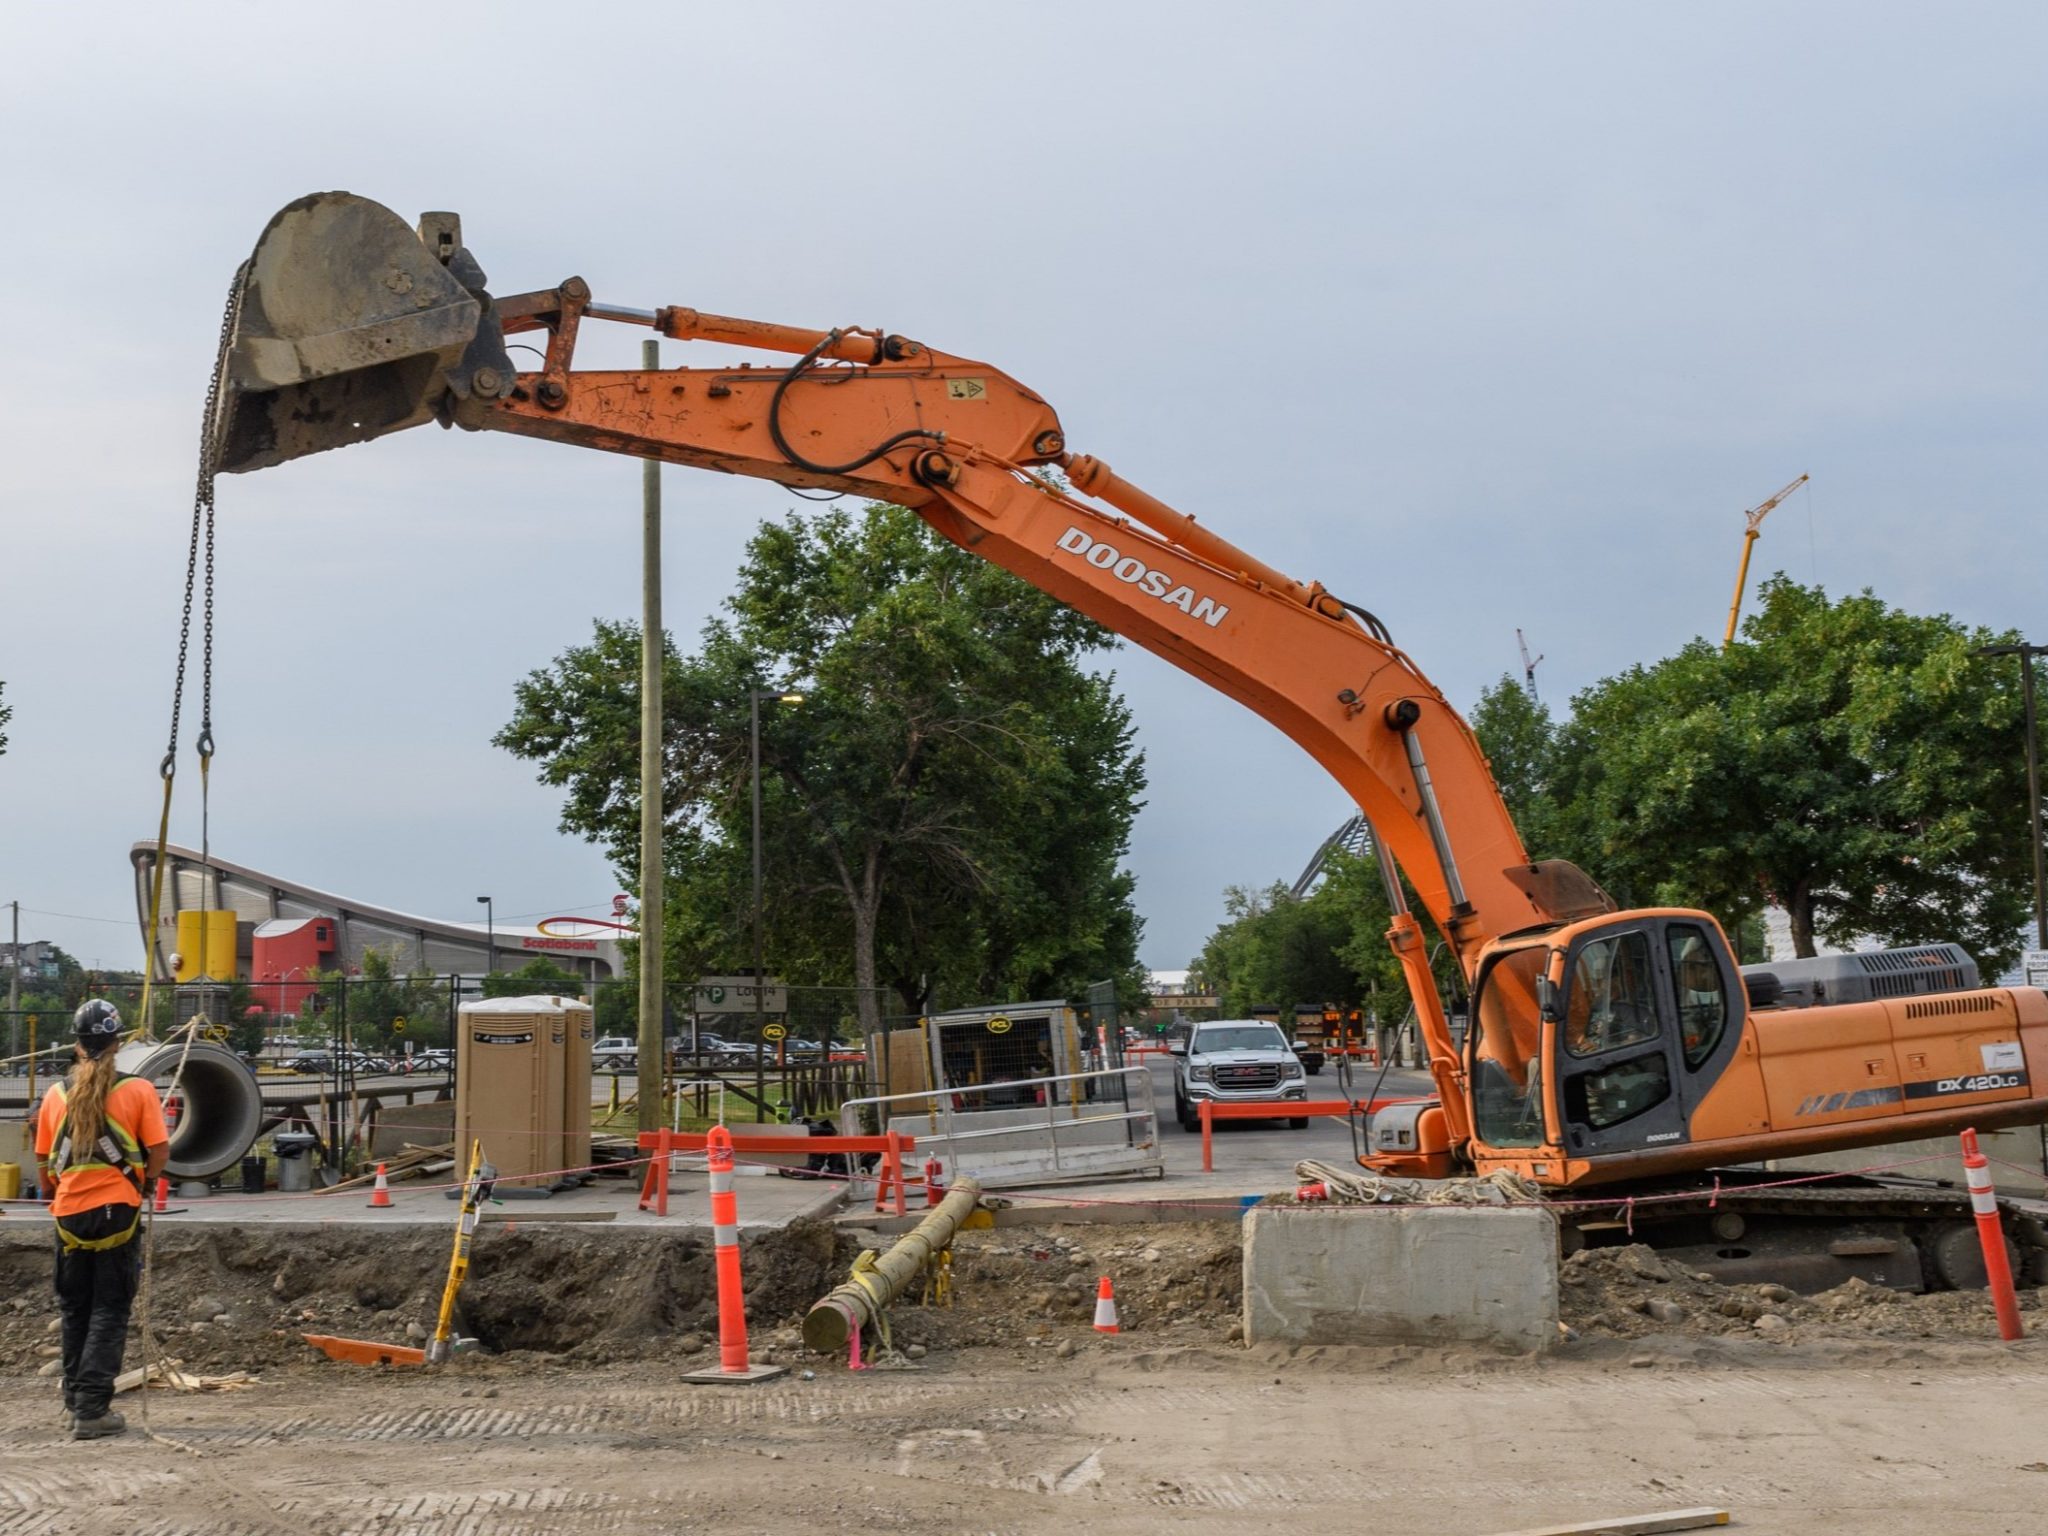 Excavator lifting and moving a pipe into place as a construction worker watches in Beltline East on 12 Avenue S.E.